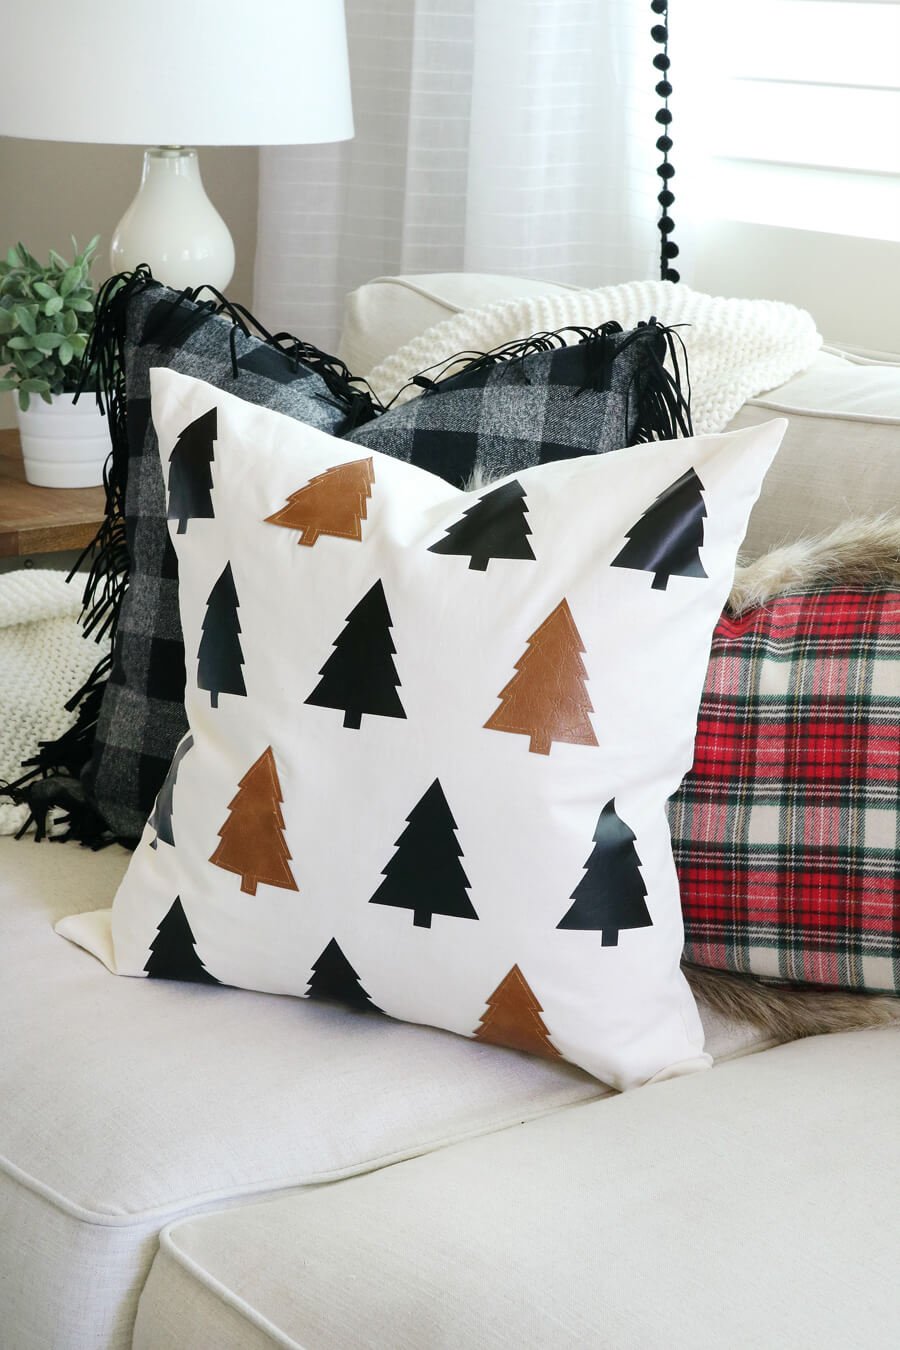 A white couch with a black and white christmas tree pillow on it
